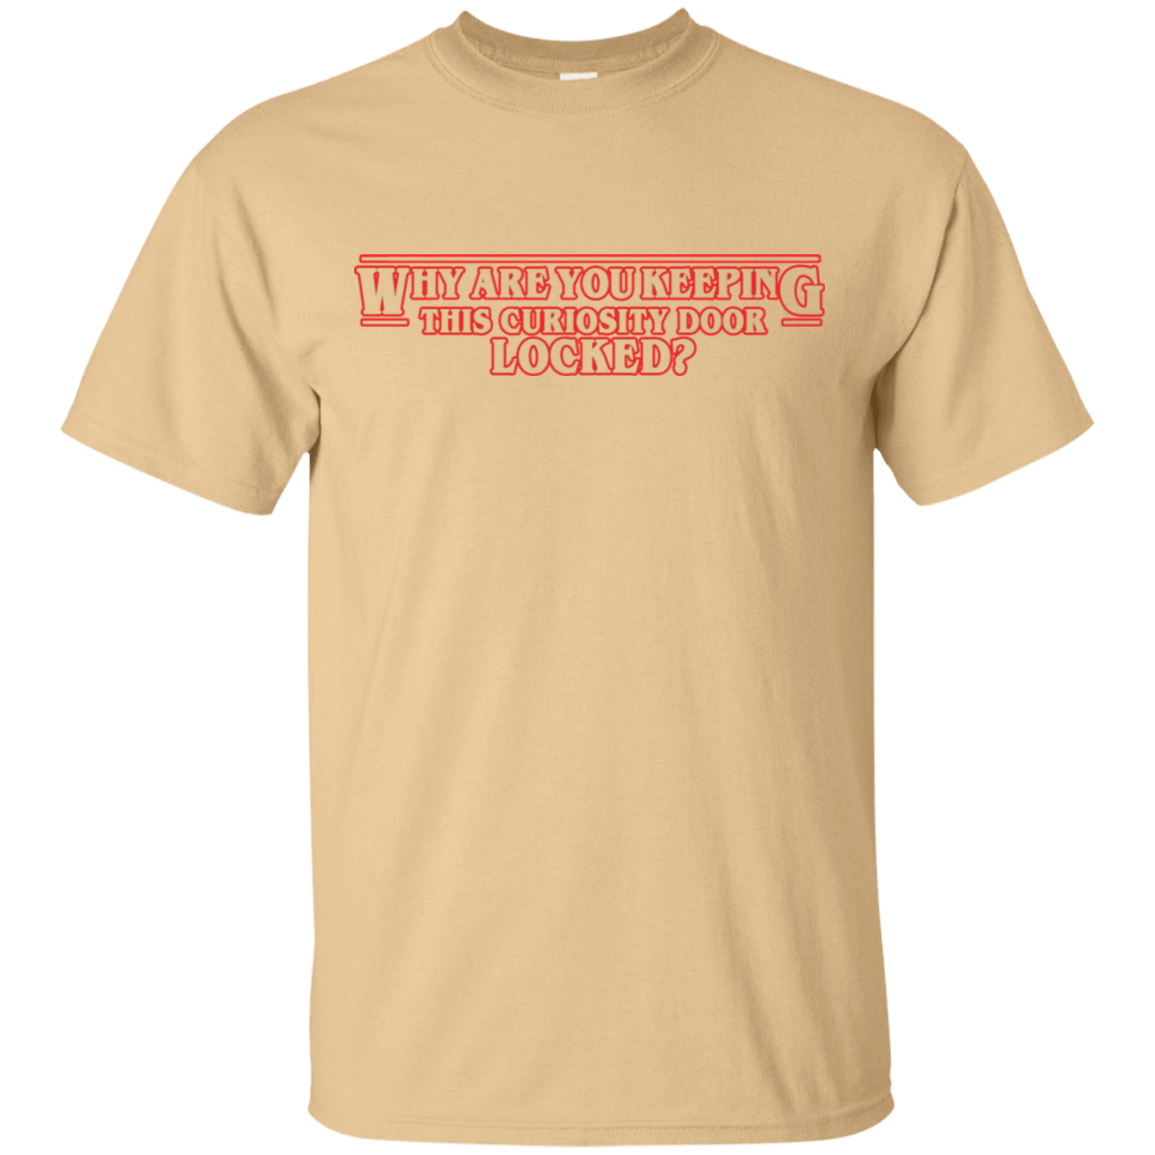 T-Shirts Vegas Gold / S Why are you Keeping this Curiosity Door Locked T-Shirt